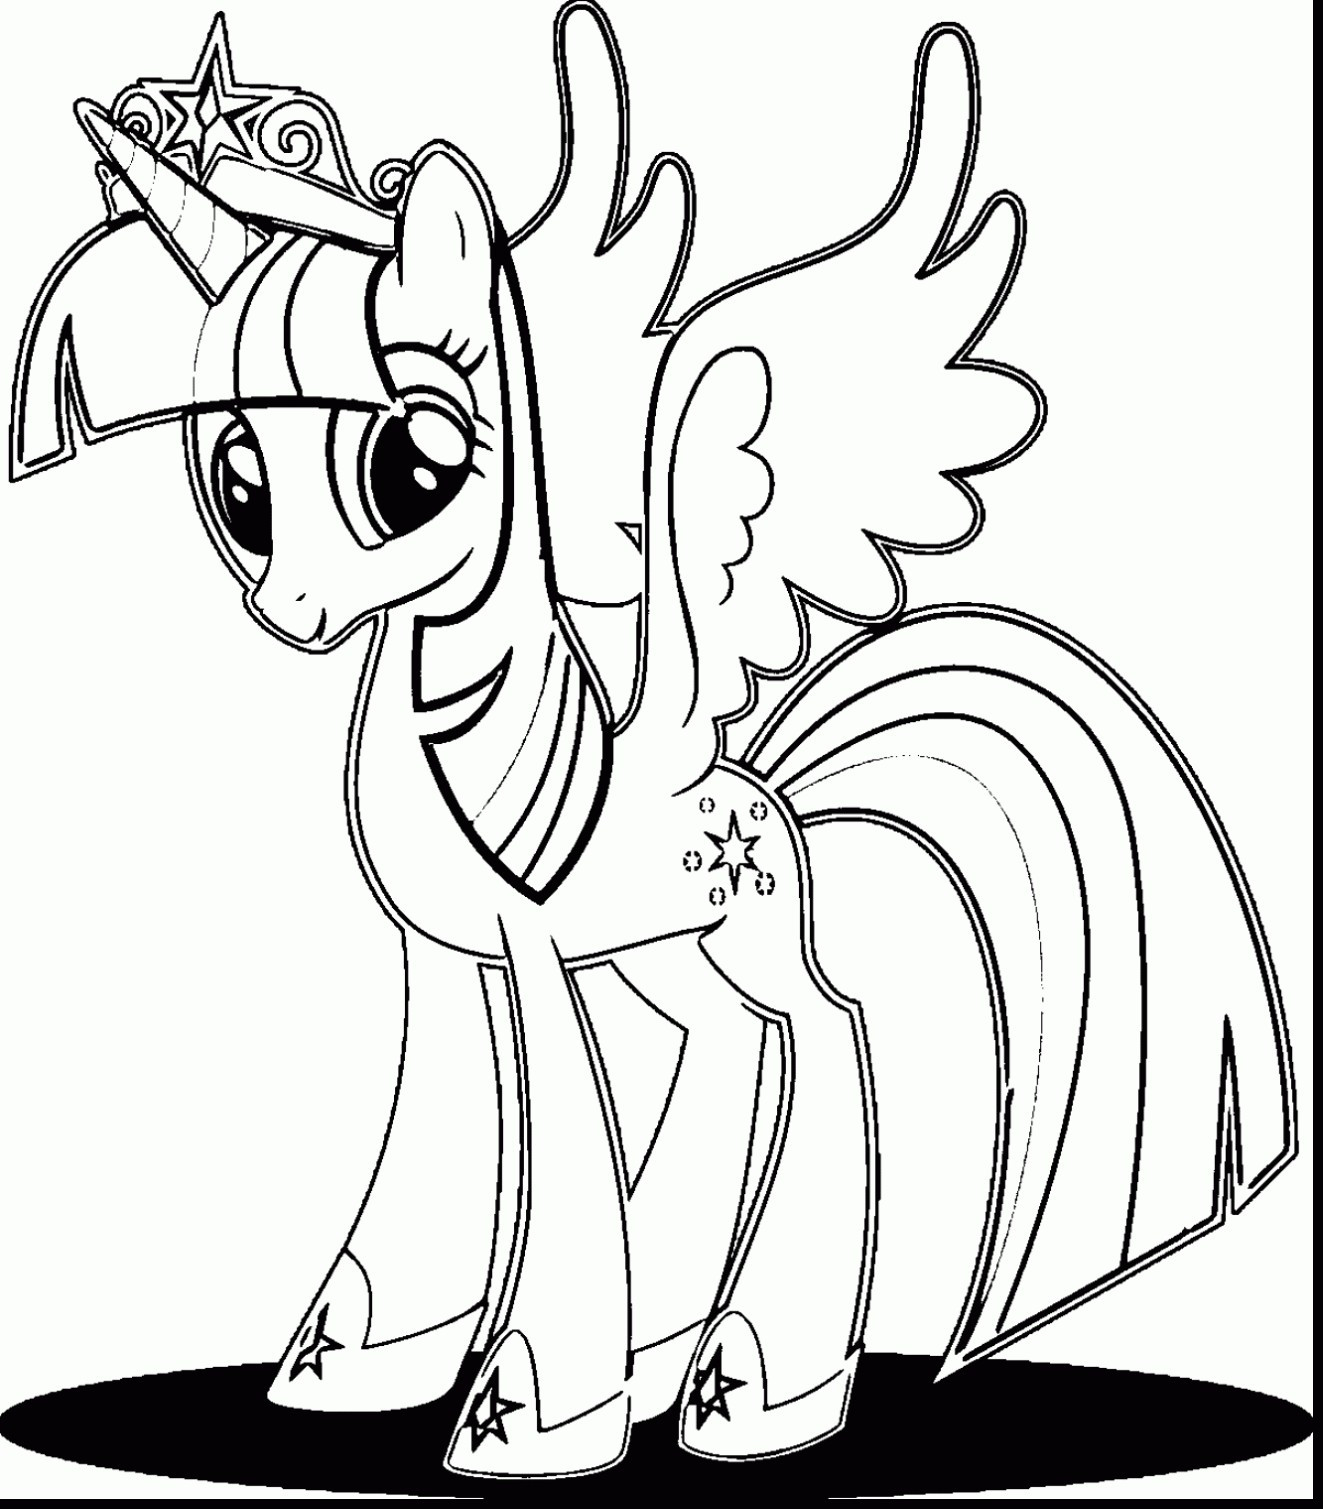 Twilight Coloring Sheets For Girls
 Twilight Sparkle Coloring Pages Printable Free Coloring